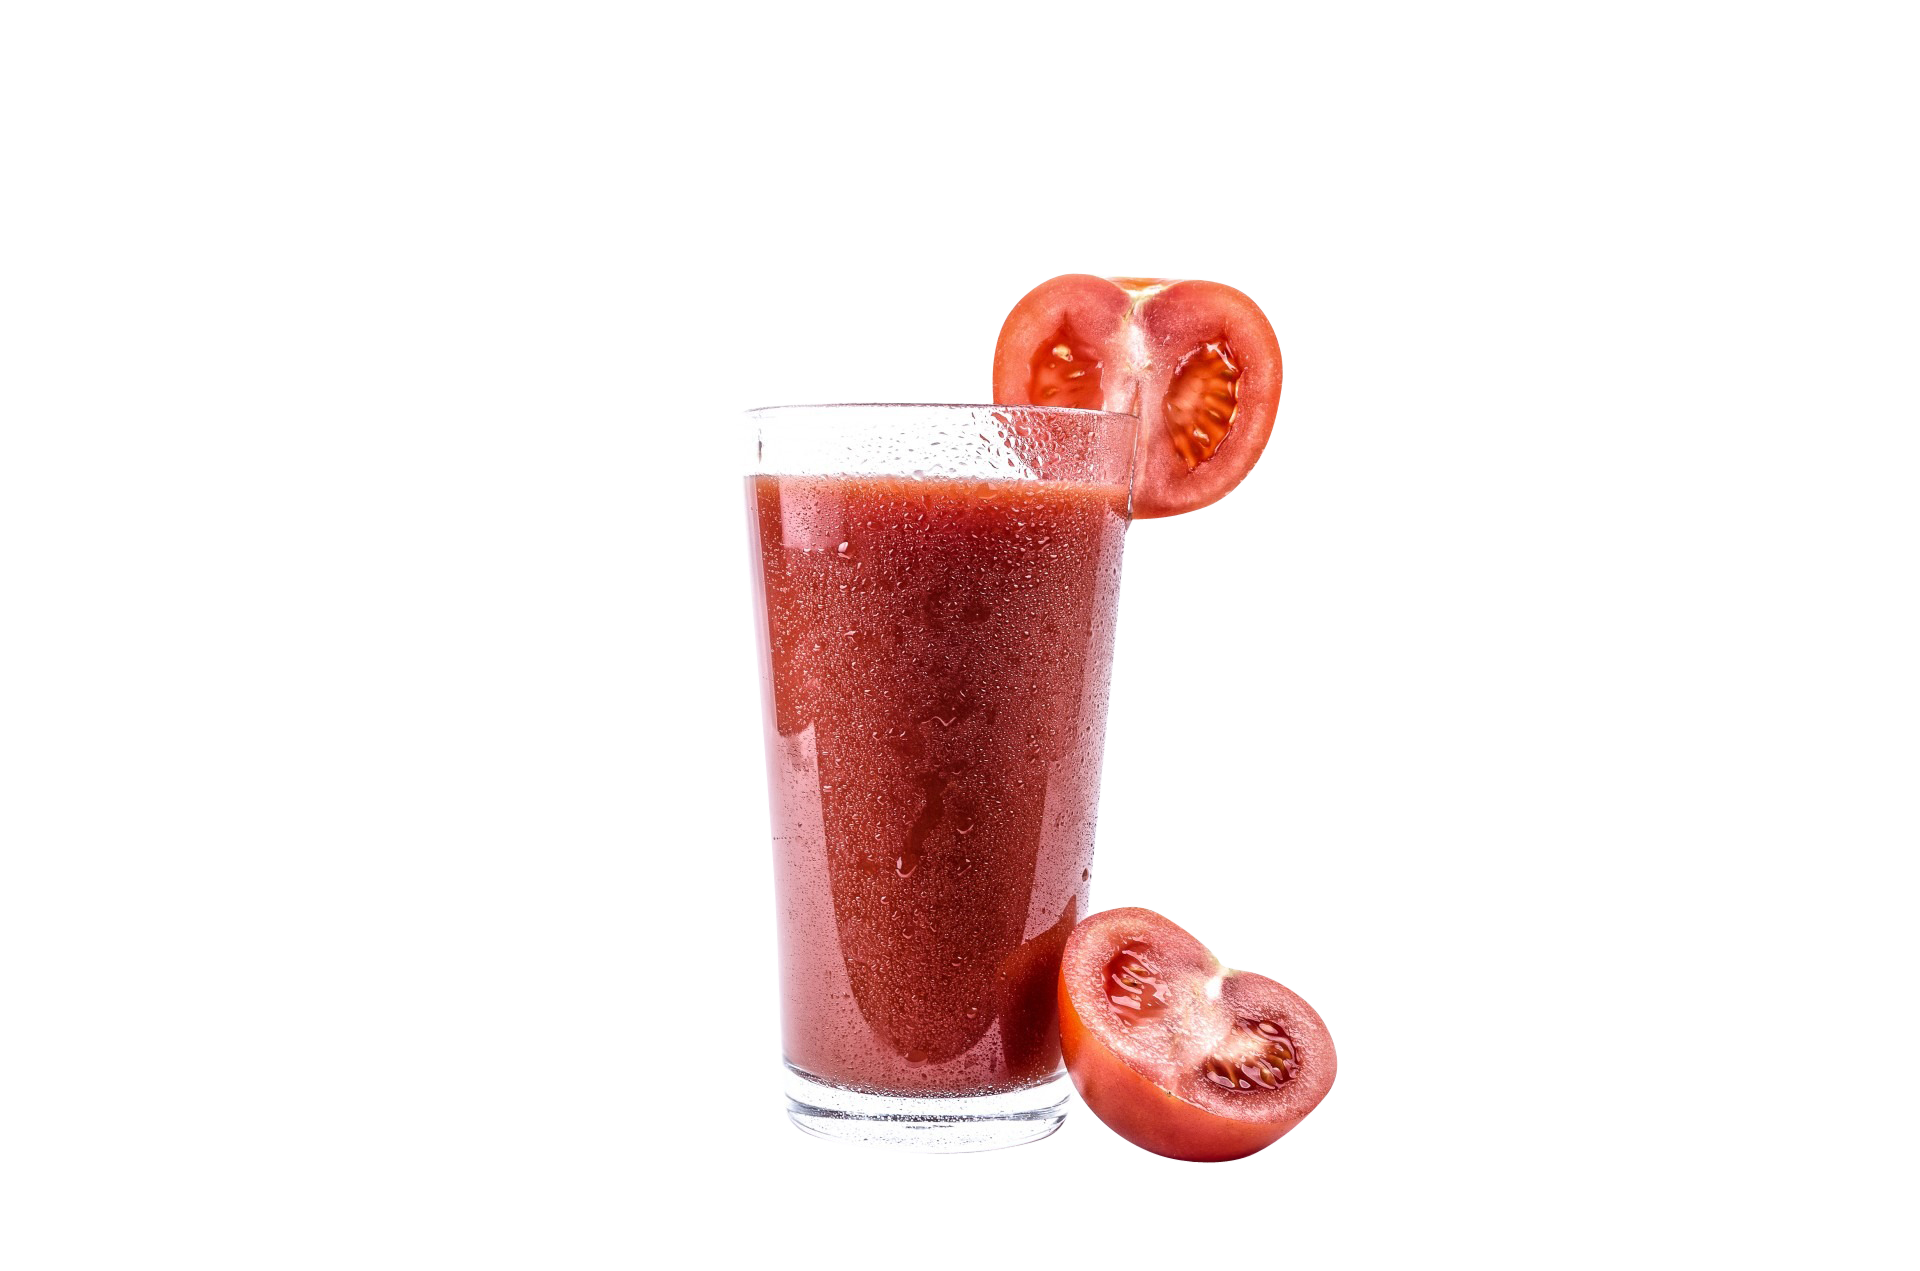 A Glass Of Tomato Juice And A Slice Of Tomato